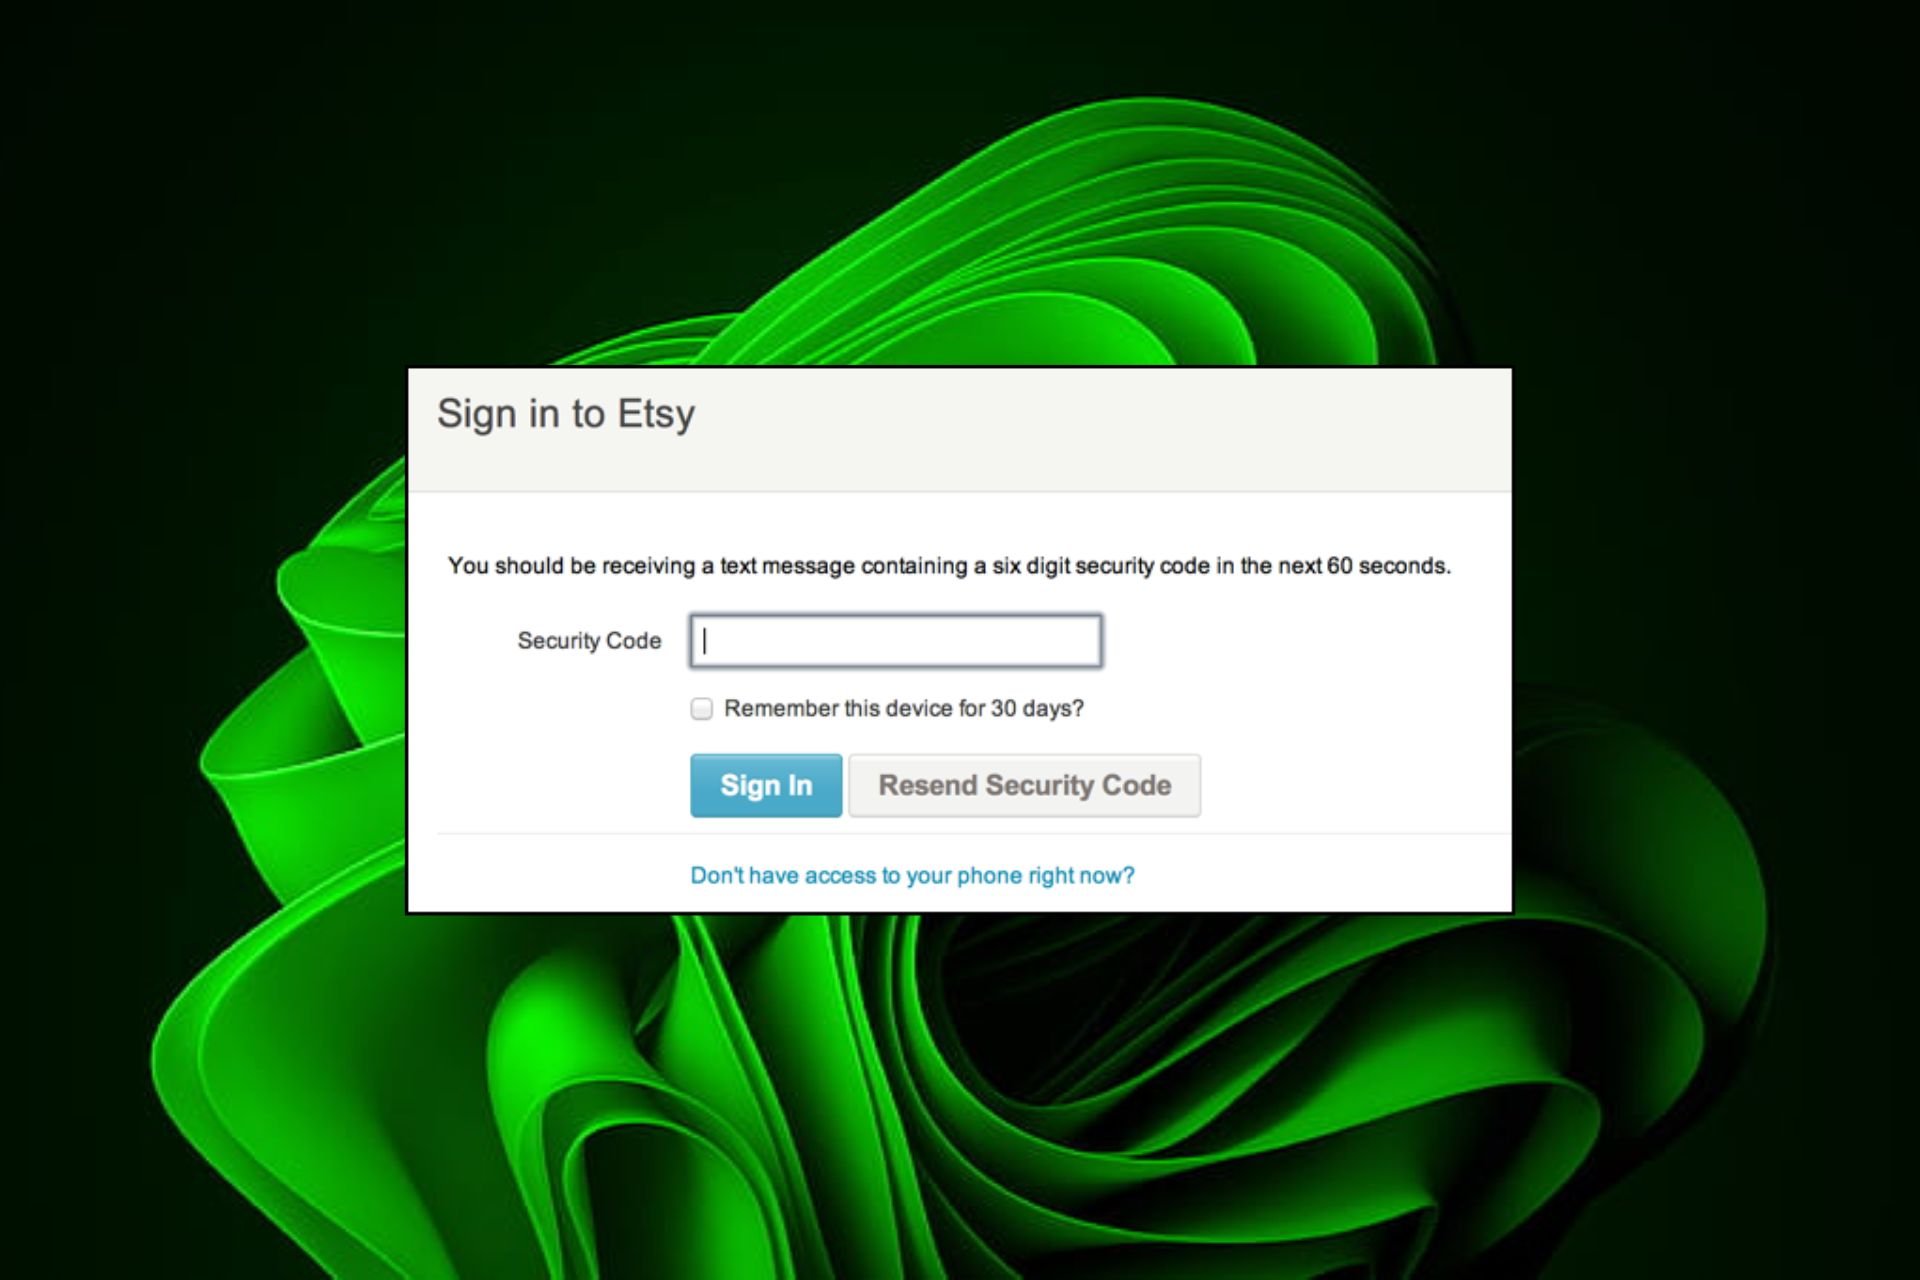 How to bypass Roblox 2 step verification and login information